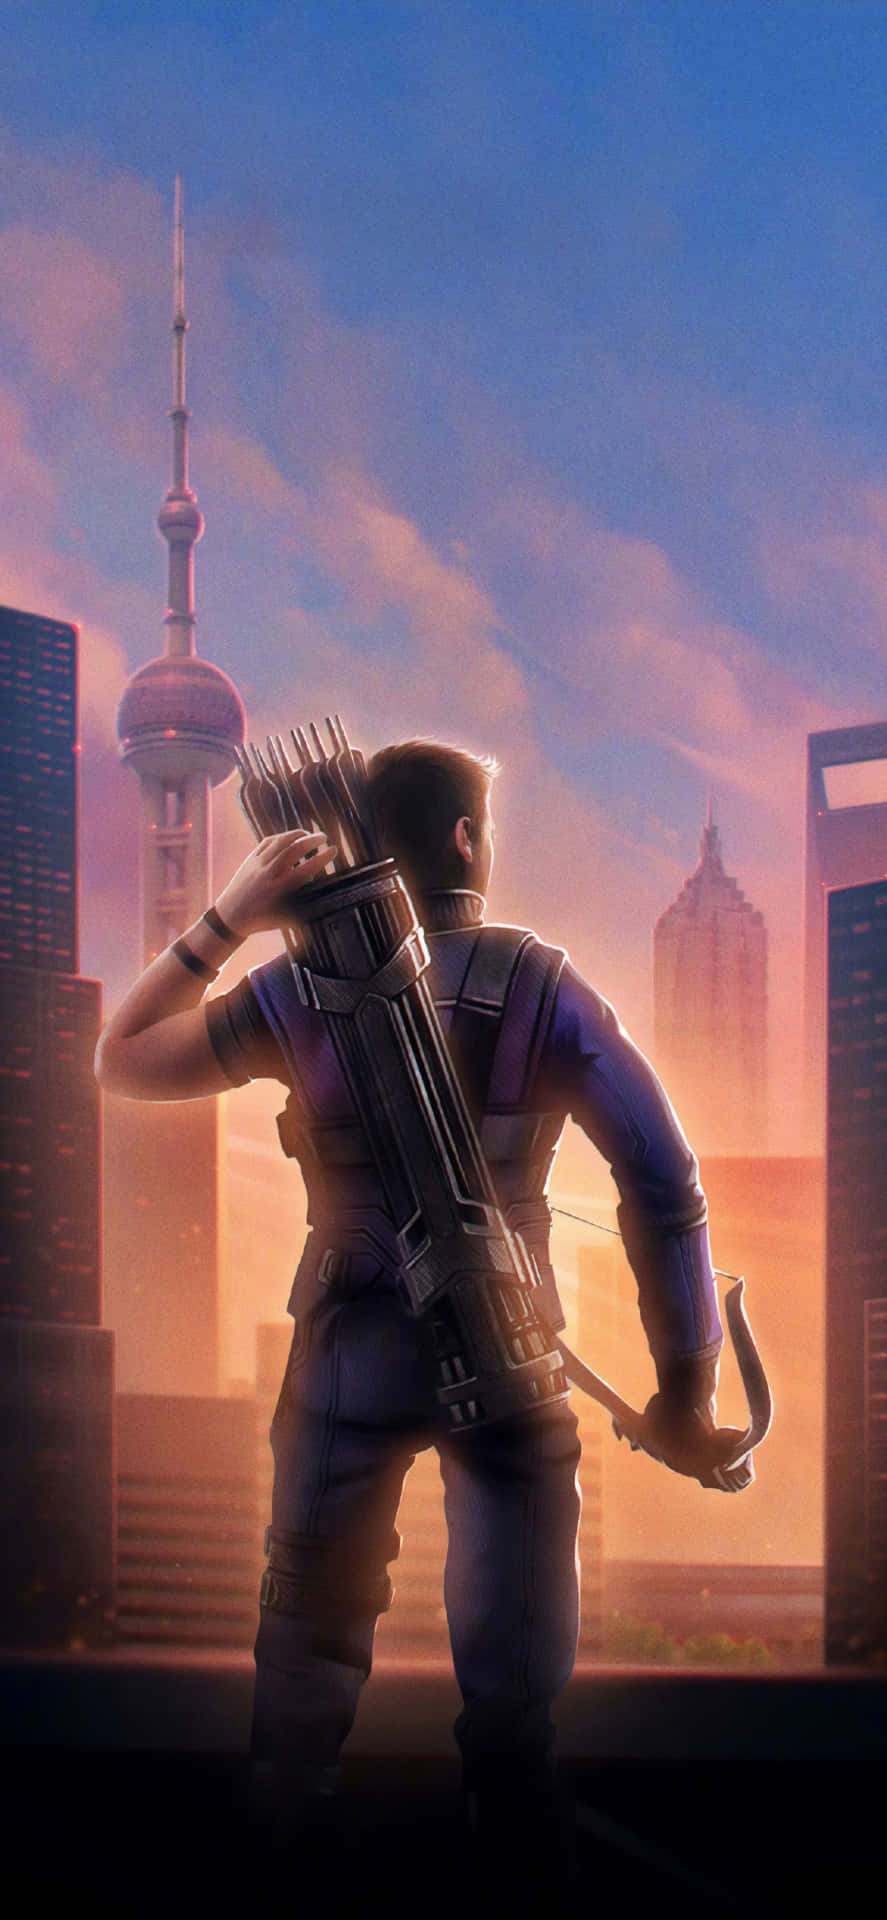 "The ultimate protector, Hawkeye keeping our world safe."